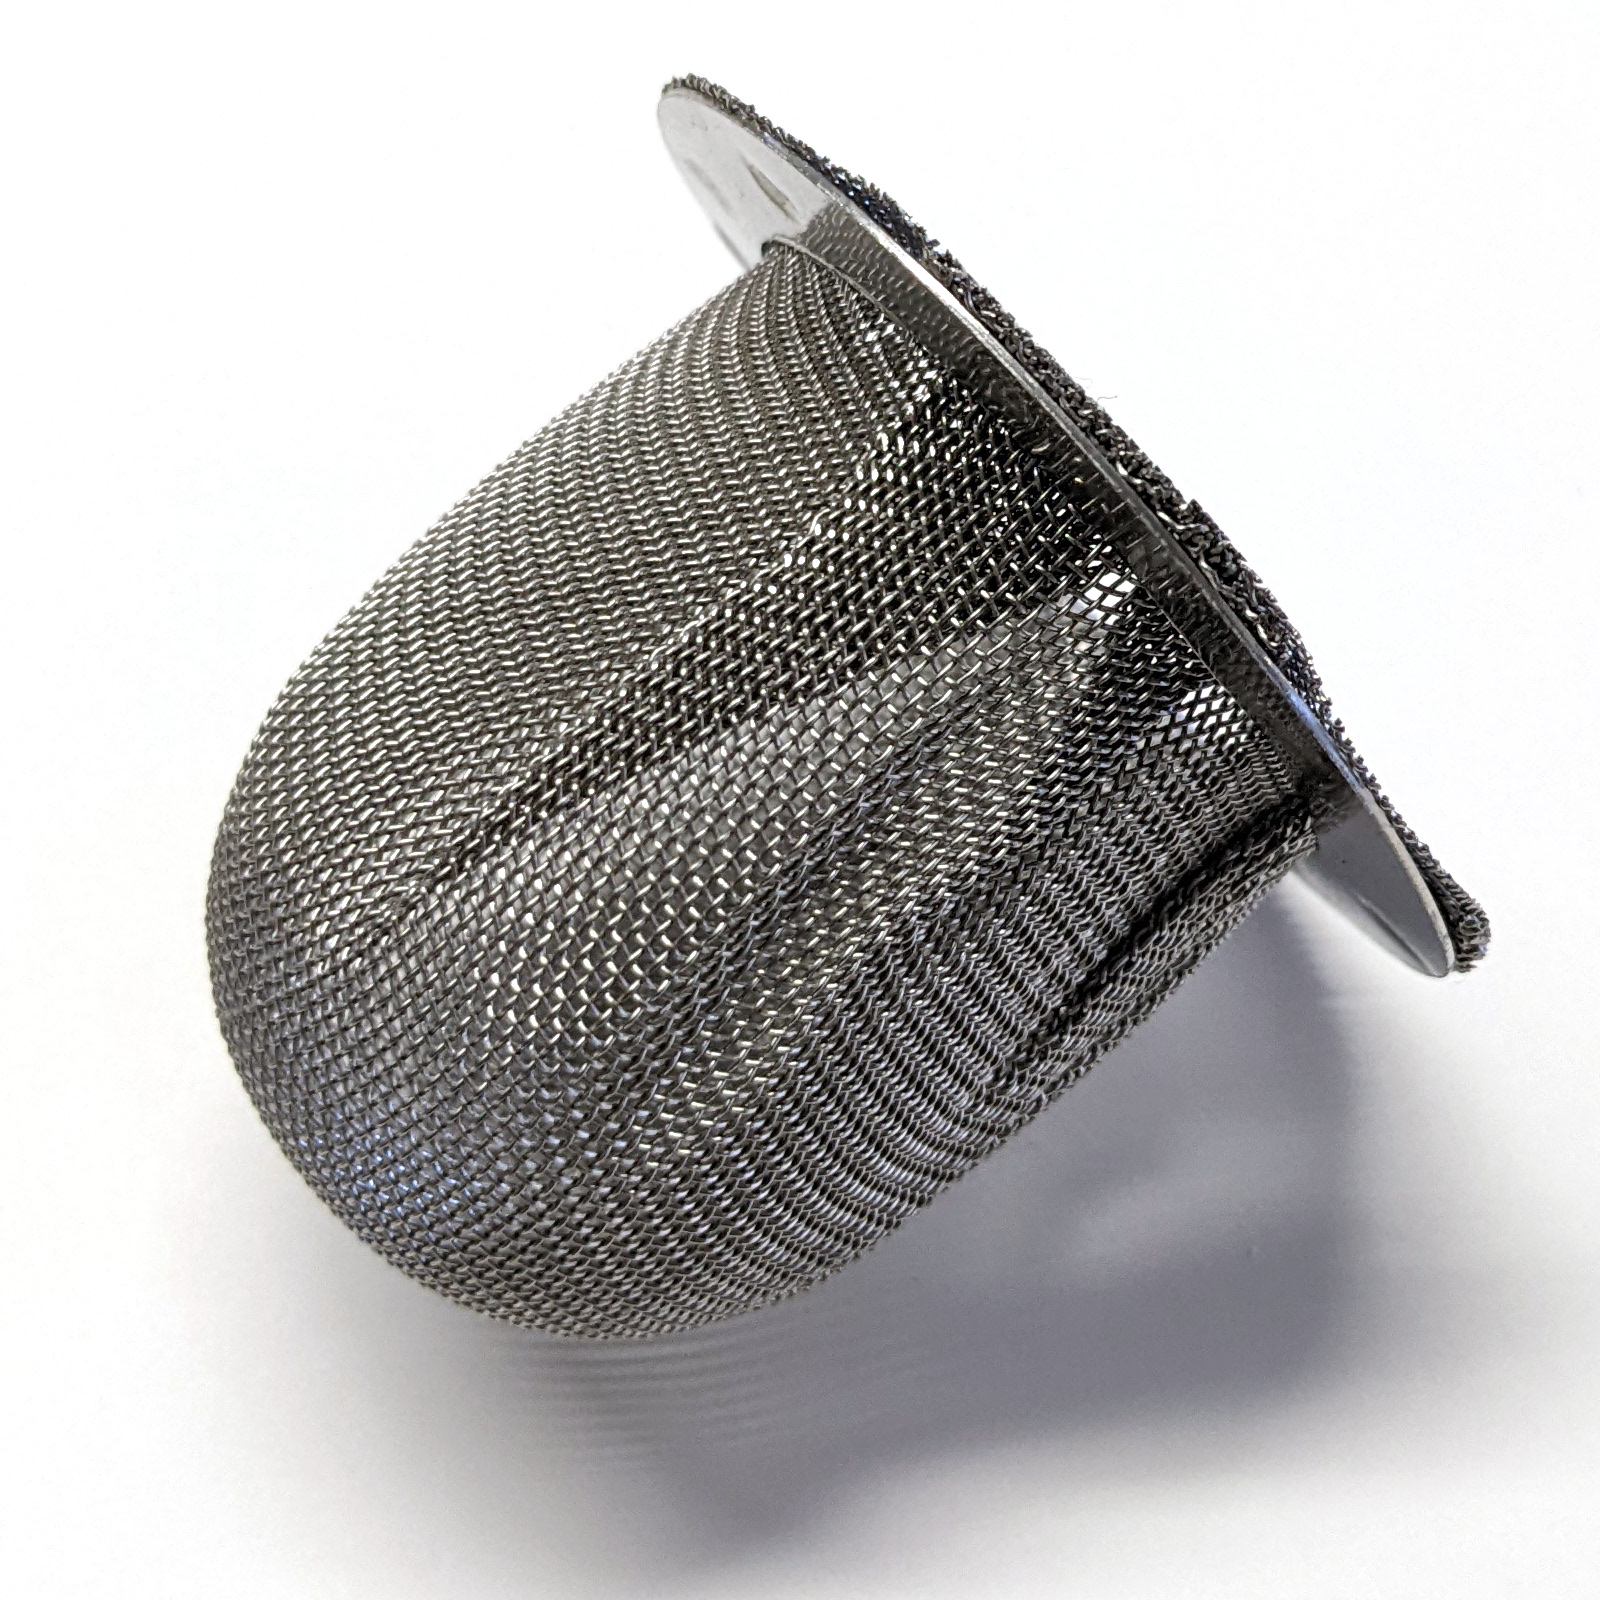 56mm Replacement Spark Arrestor Screen Insert - Click Image to Close